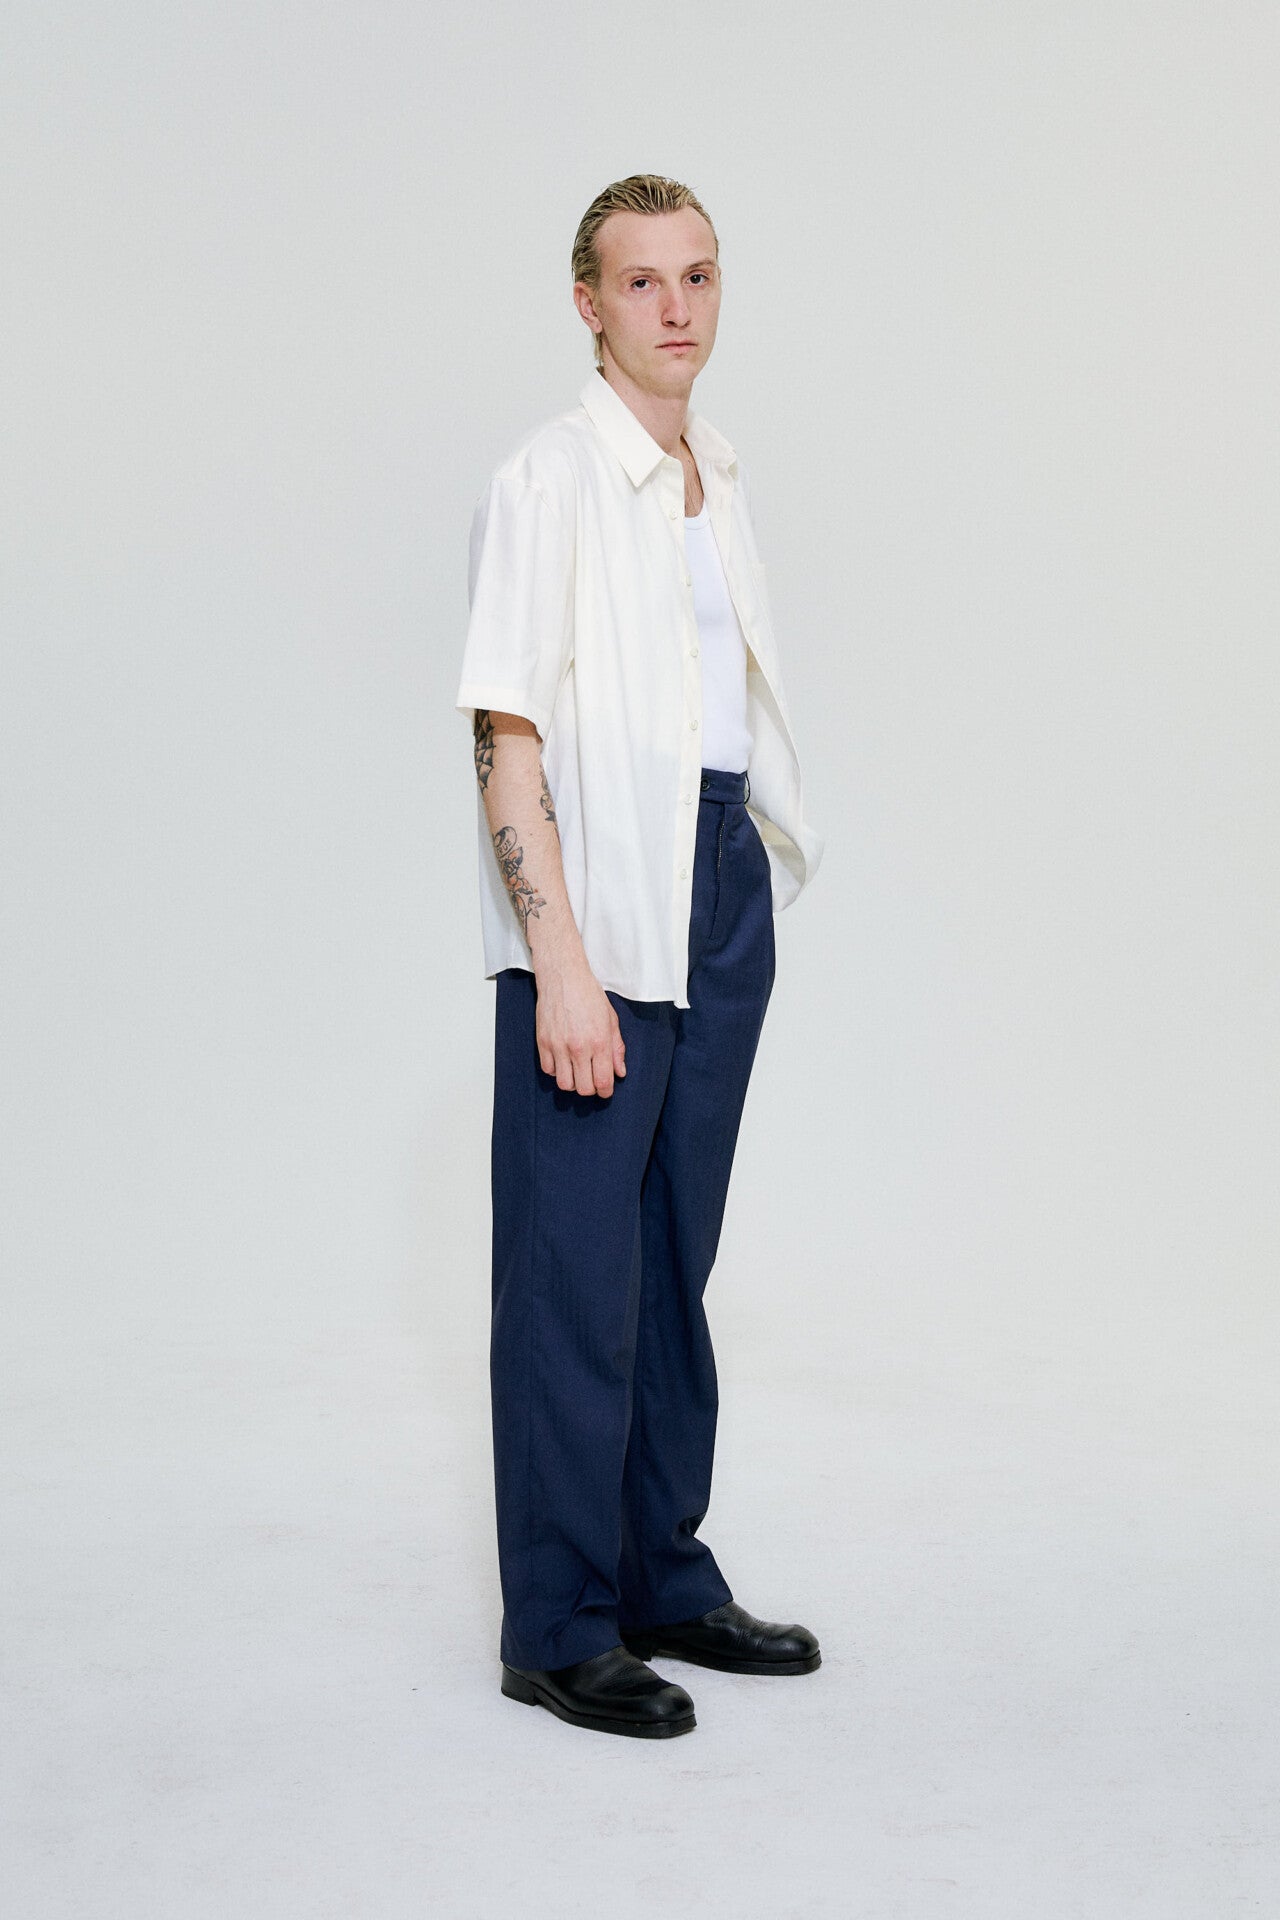 Ode shirt in ivory by goutez